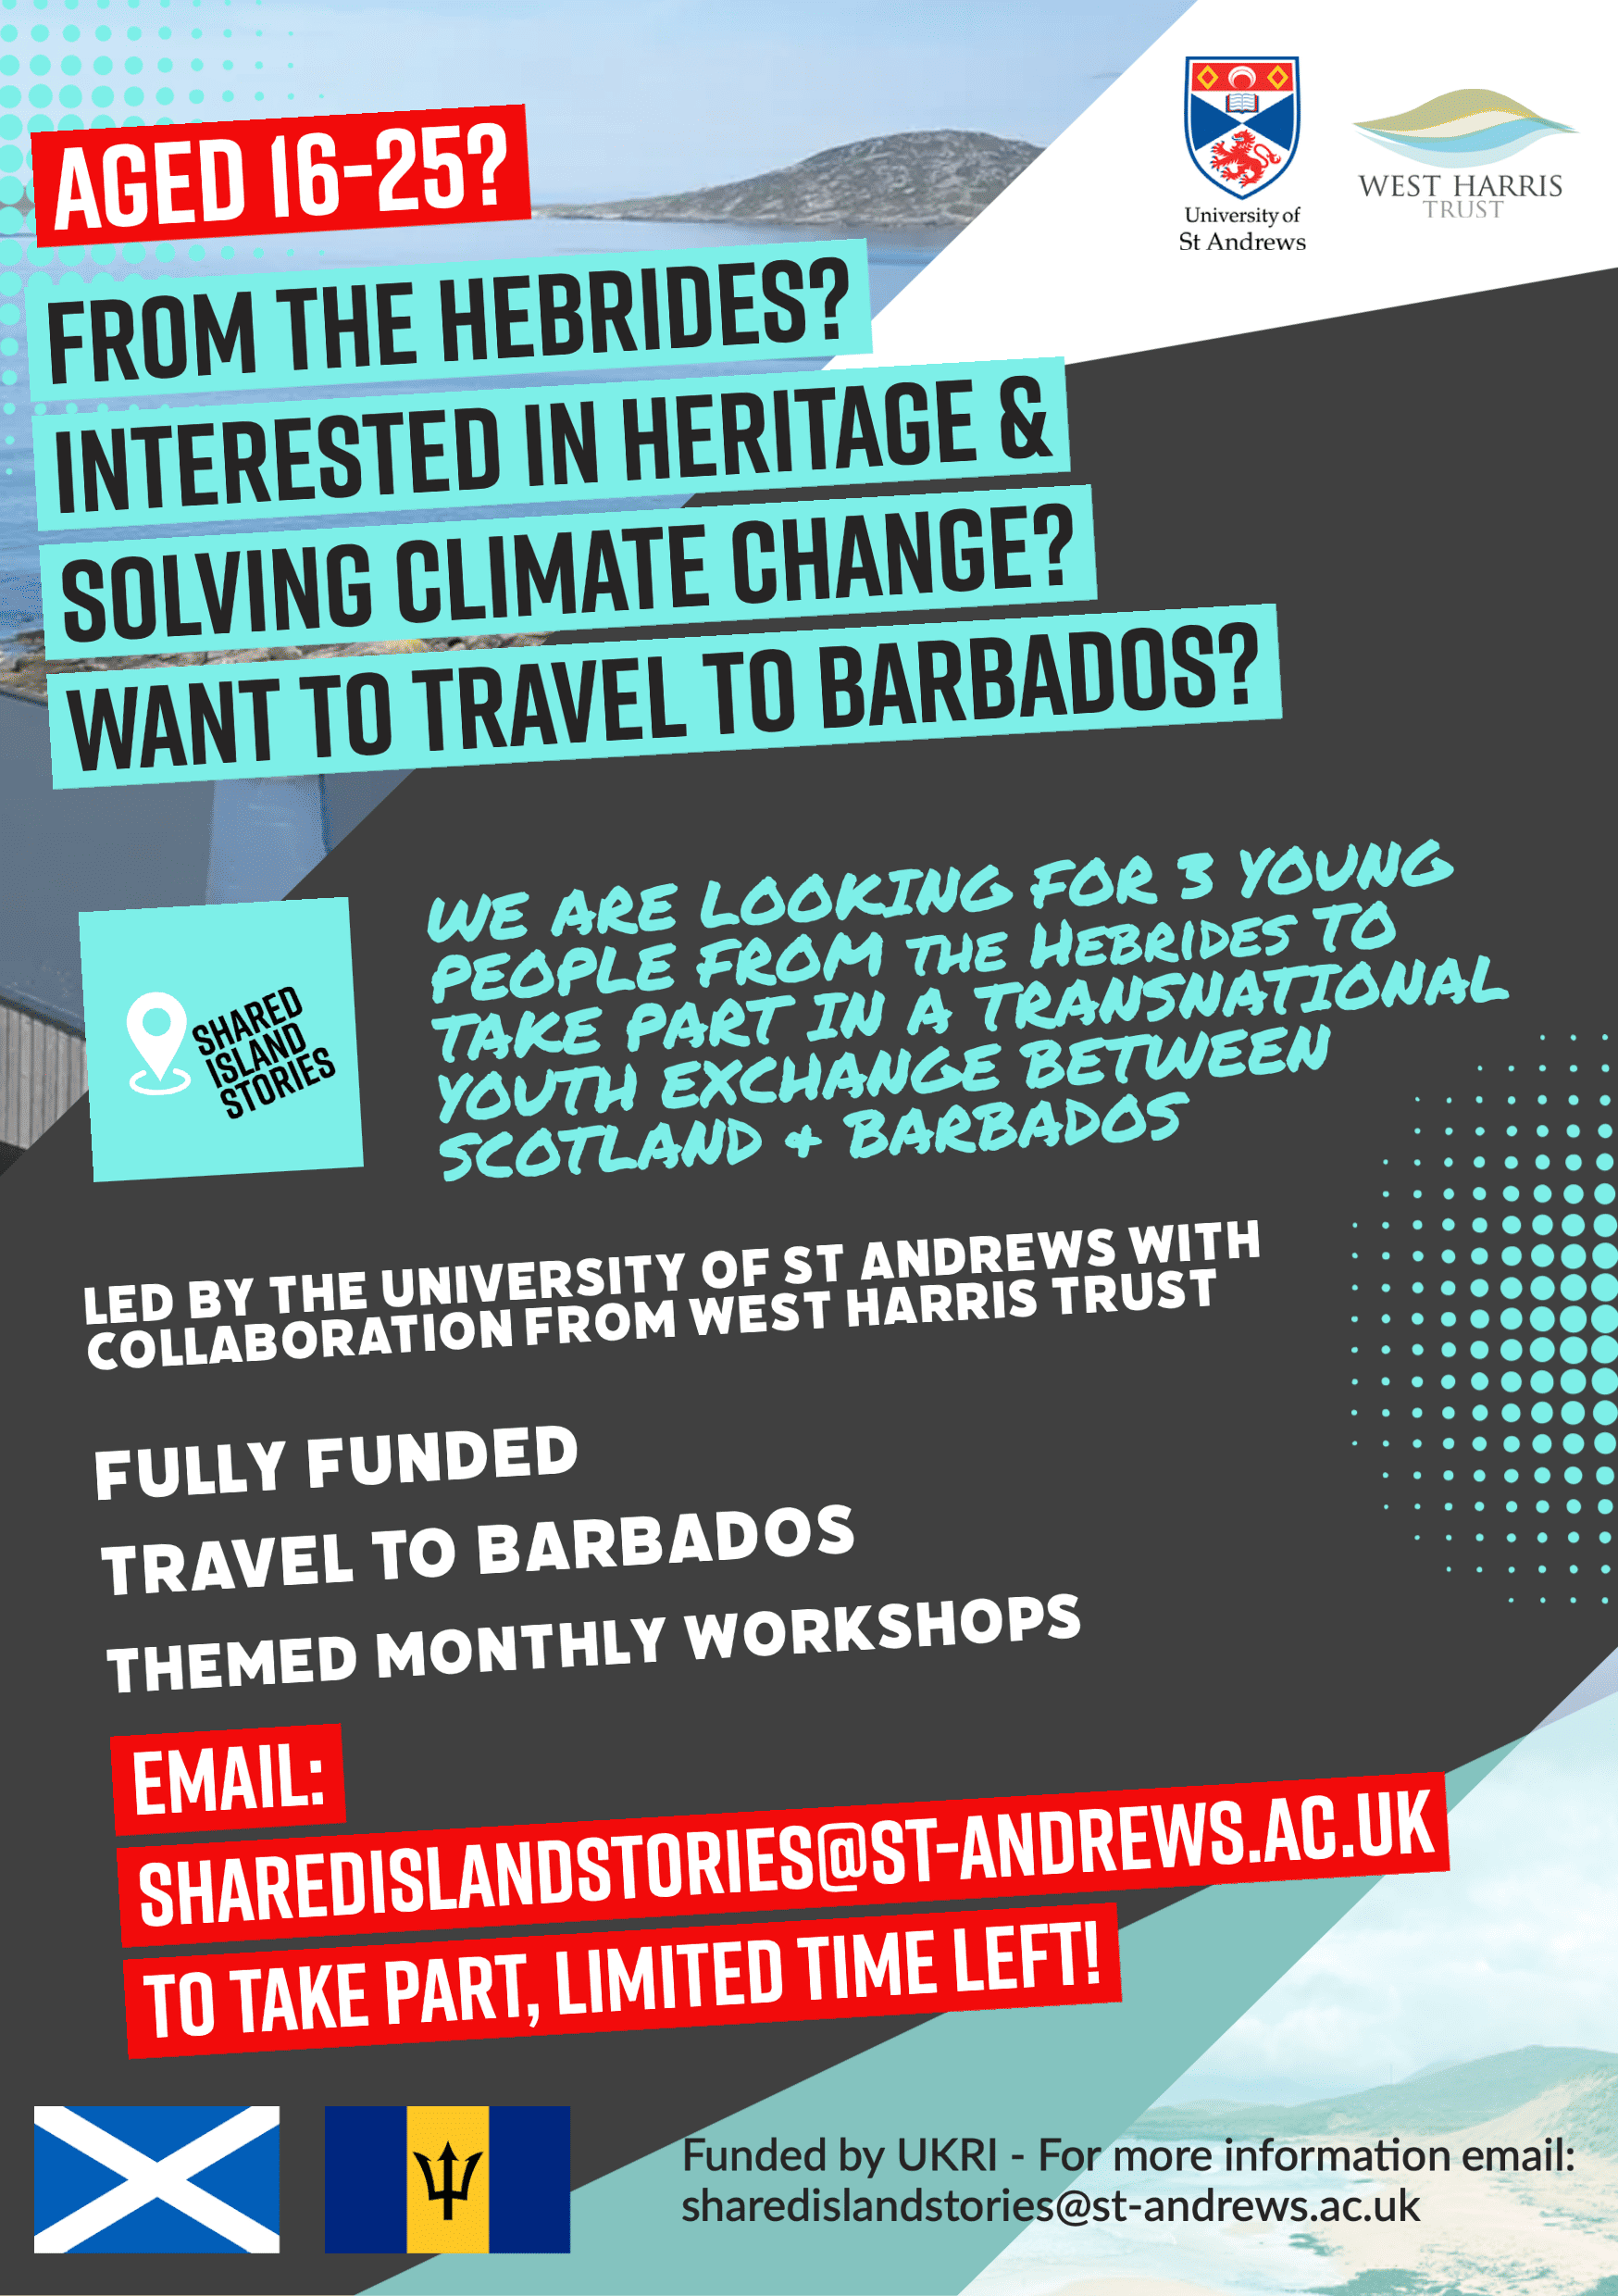 Hebrides-Barbados: Youth Exchange Opportunity